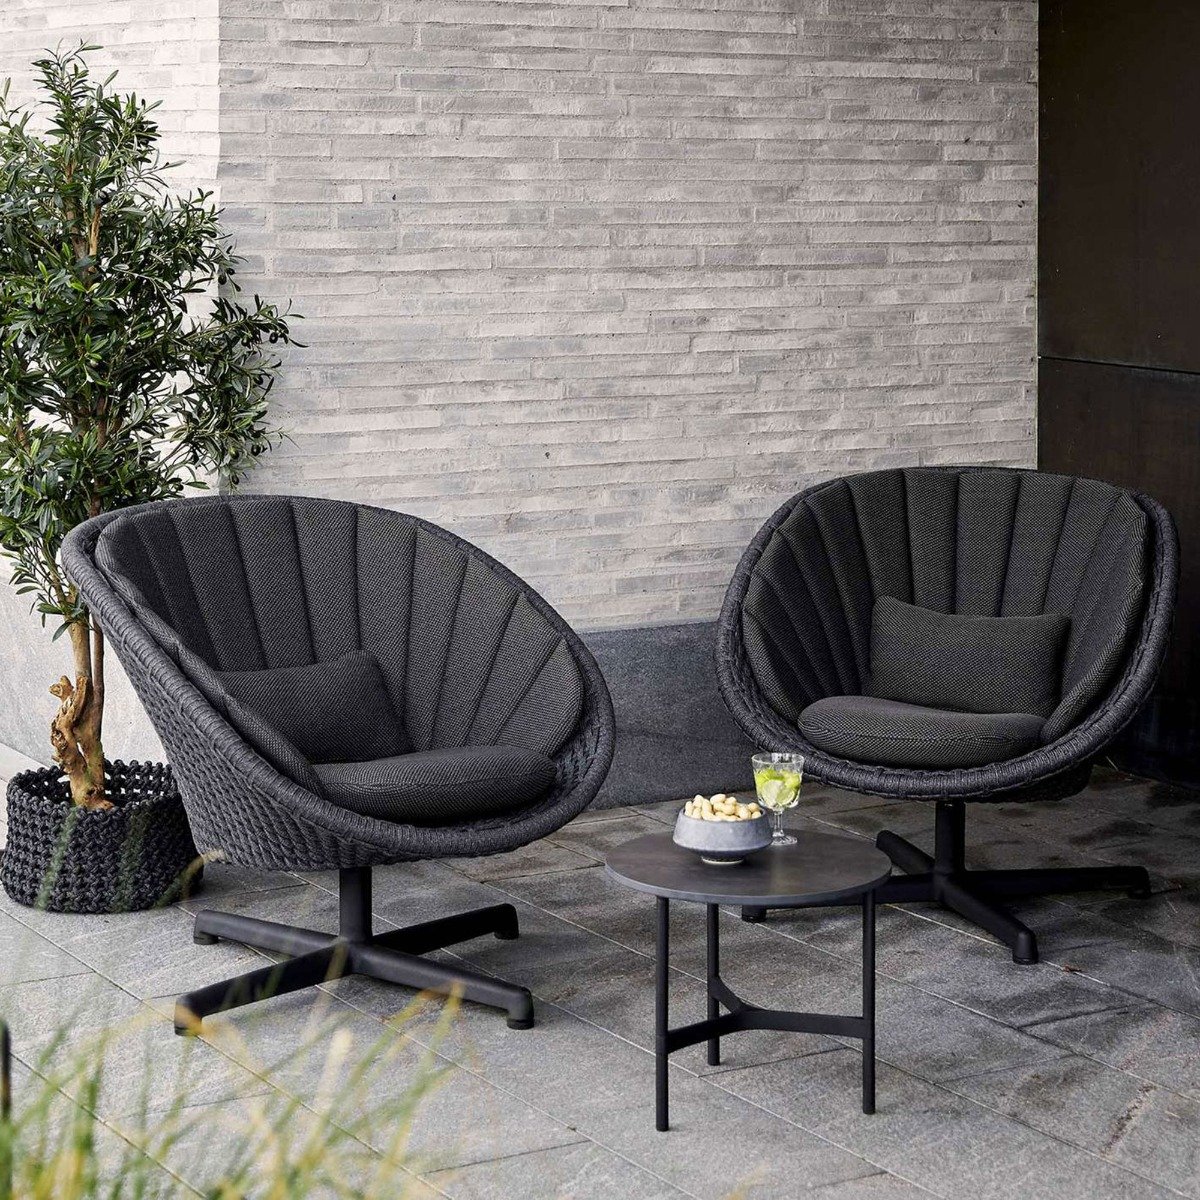 Cane Line Peacock Swivel Lounge Chair With Cushion Set, Grey | Barker & Stonehouse